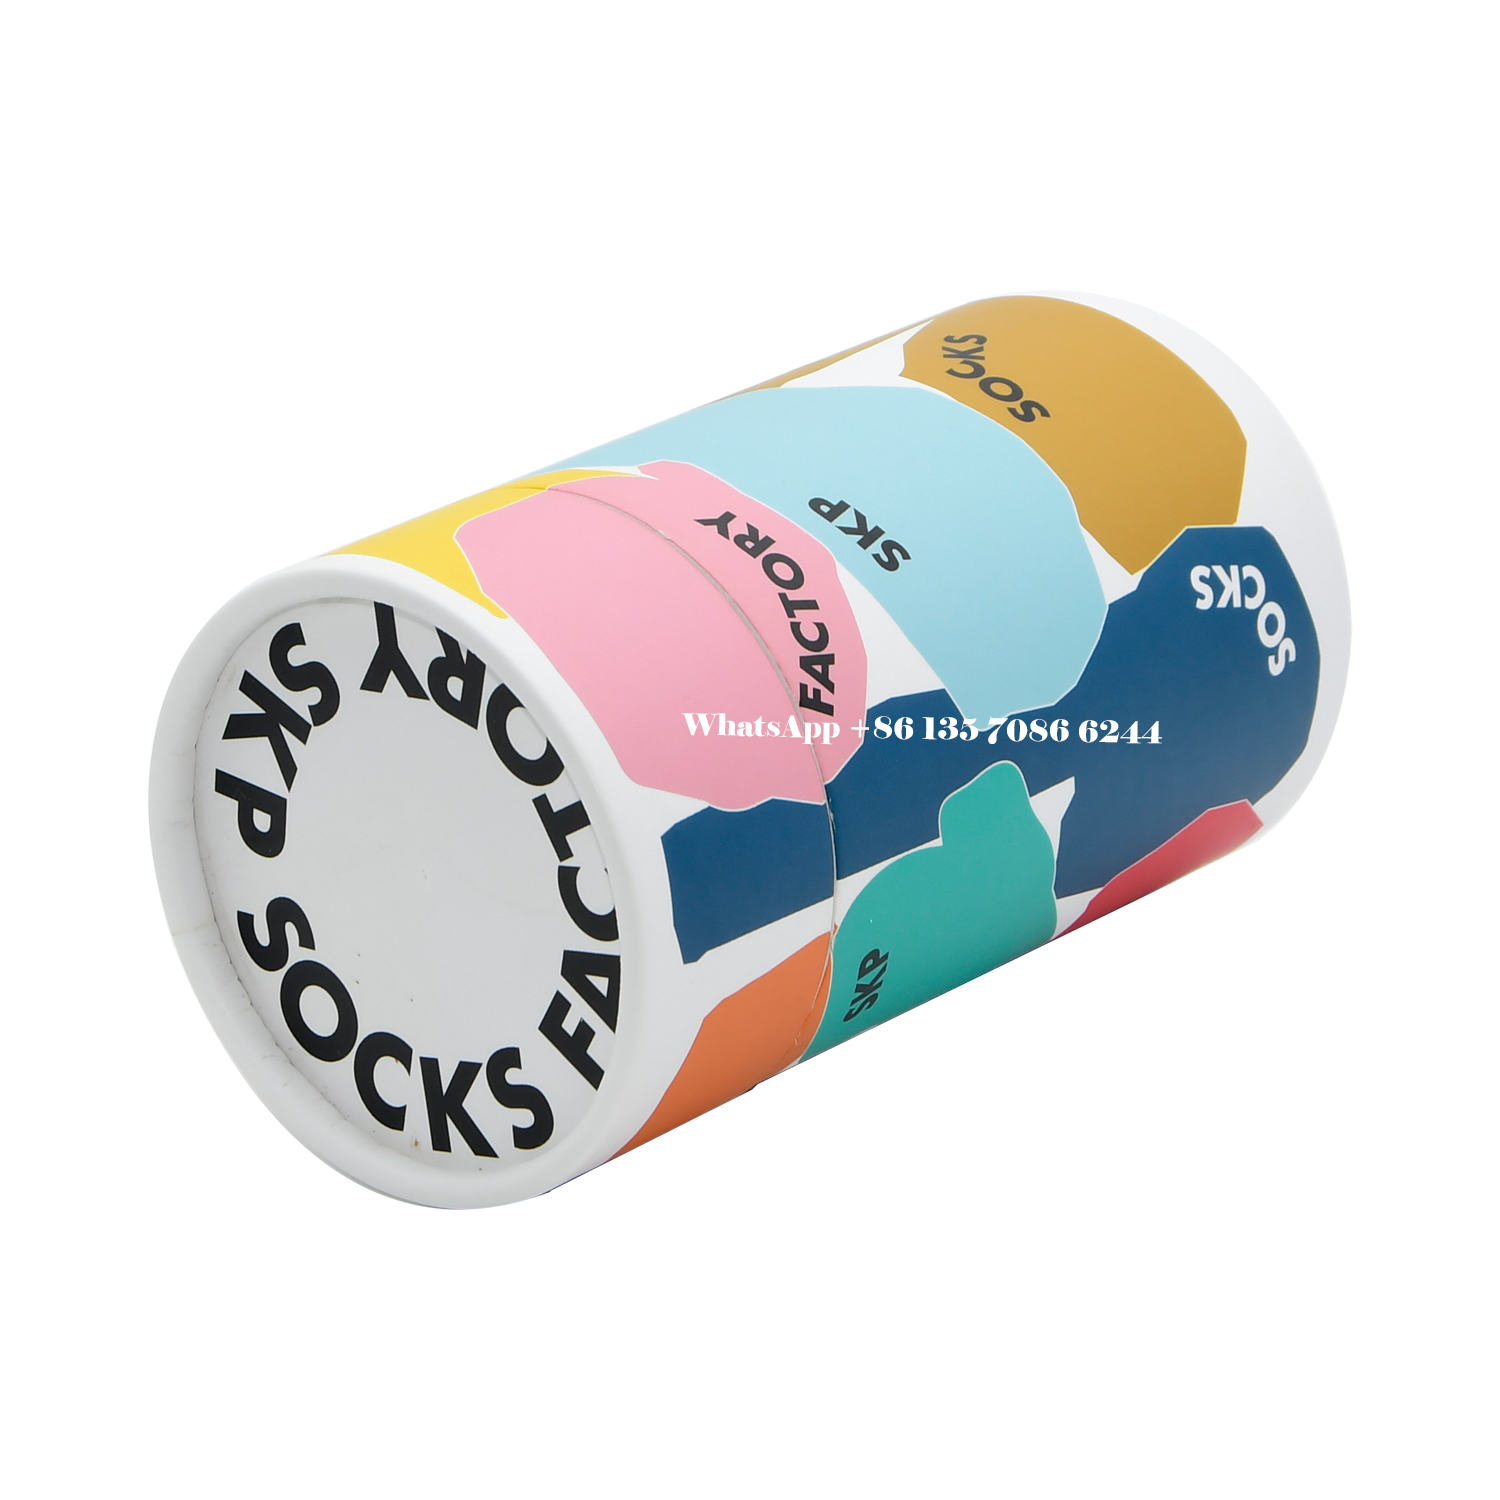  Personalized Socks Paper Tube Packaging Cylinder Boxes  